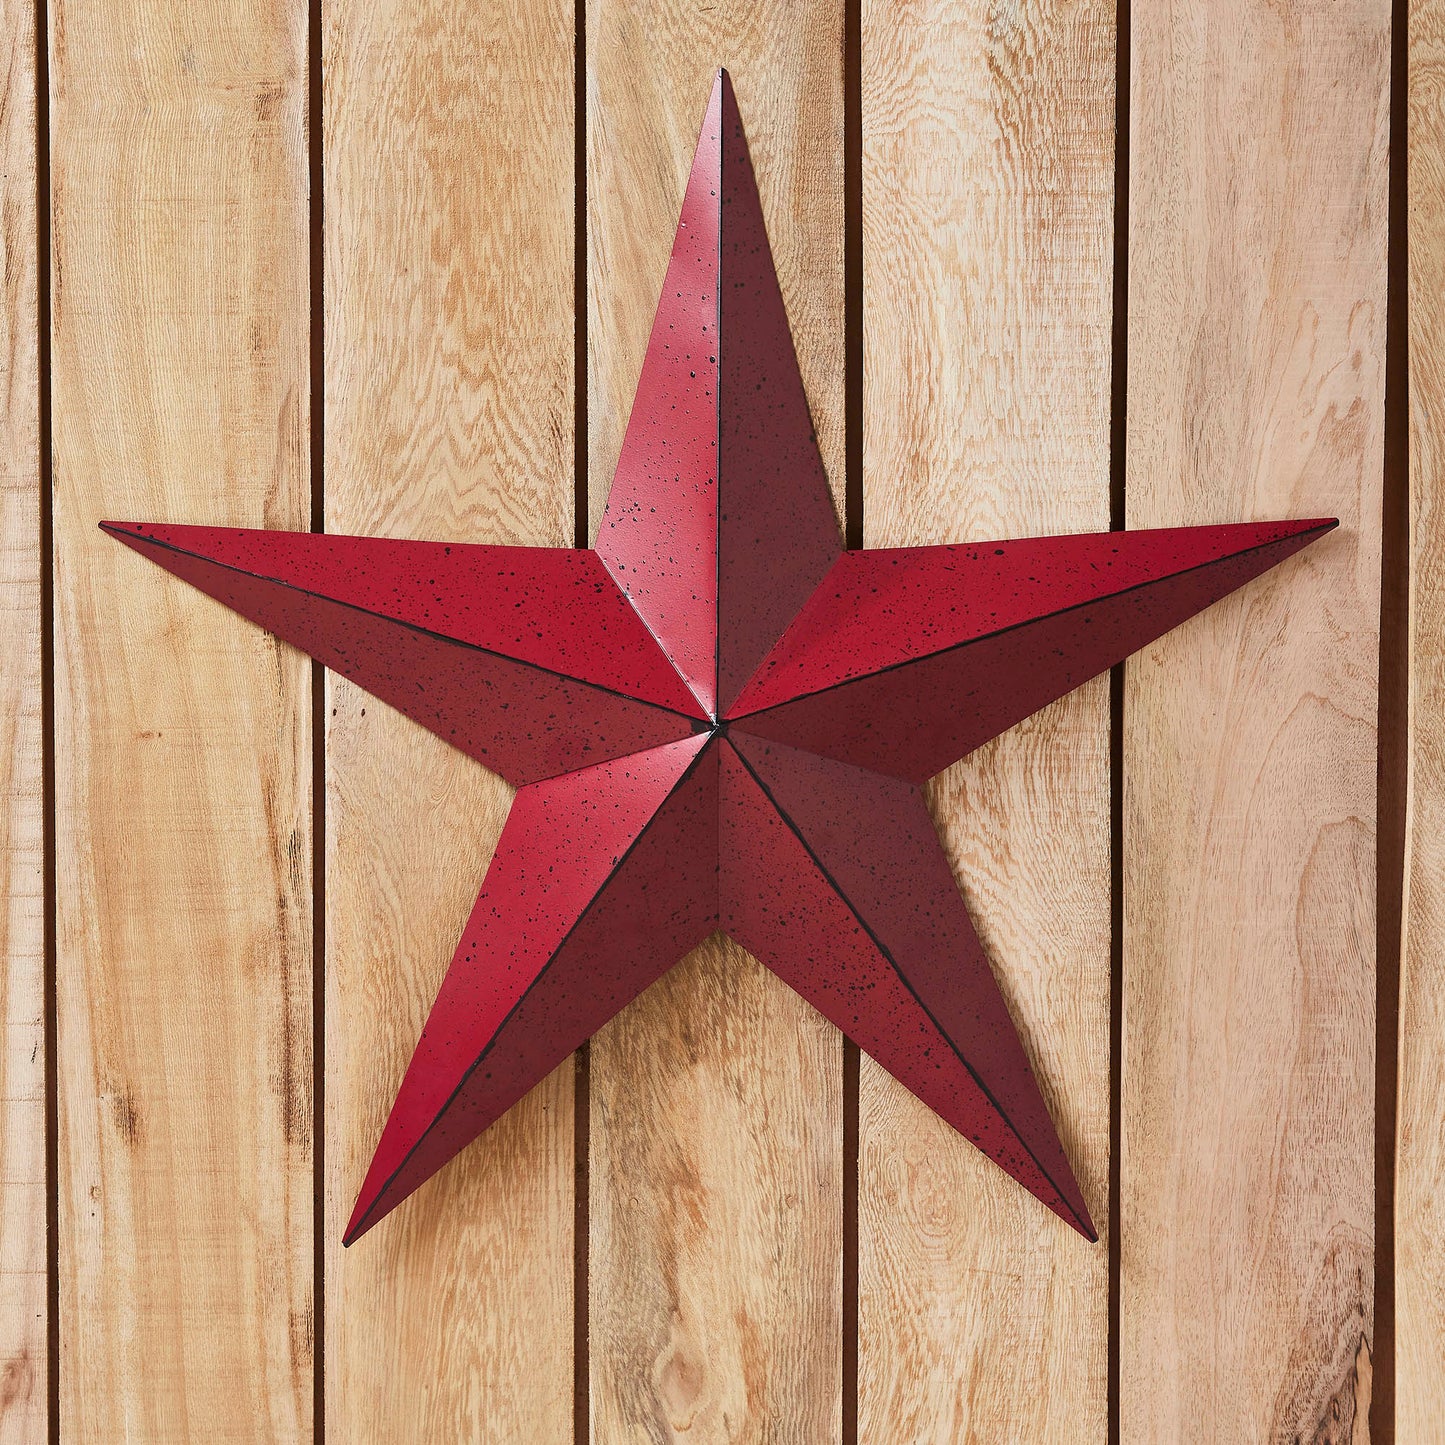 VHC Brands Patriotic Faceted Metal Star Burgundy Wall Hanging 24x24, Independence Day Decor, American Star Design, Distressed Appearance Metal Wall Hanging,  Star Shape, Country, Burgundy